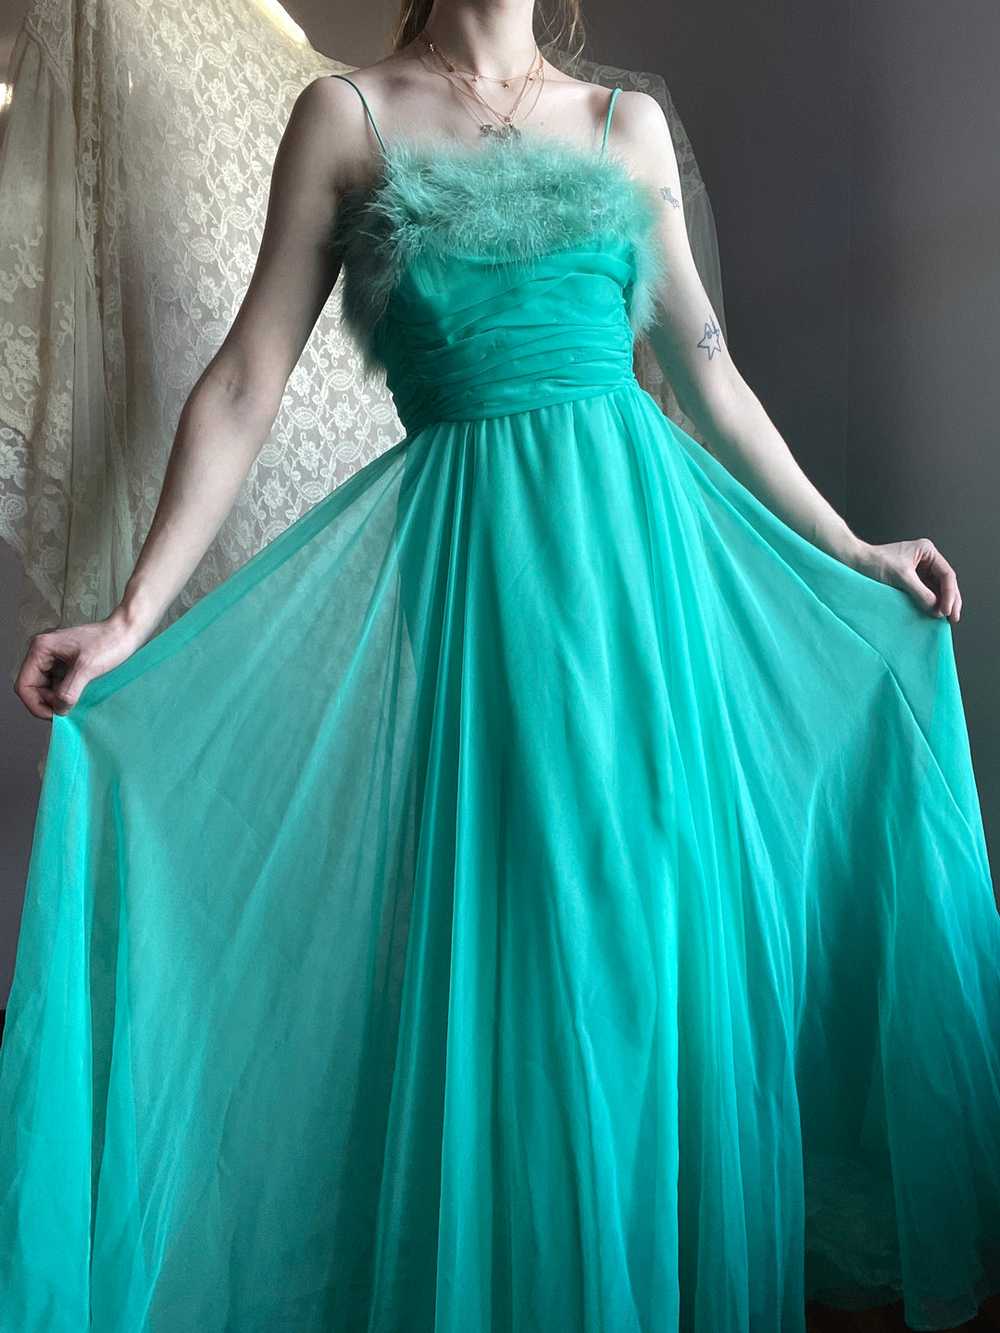 1960s Marabou Feather Green Chiffon Gown Dress - image 5